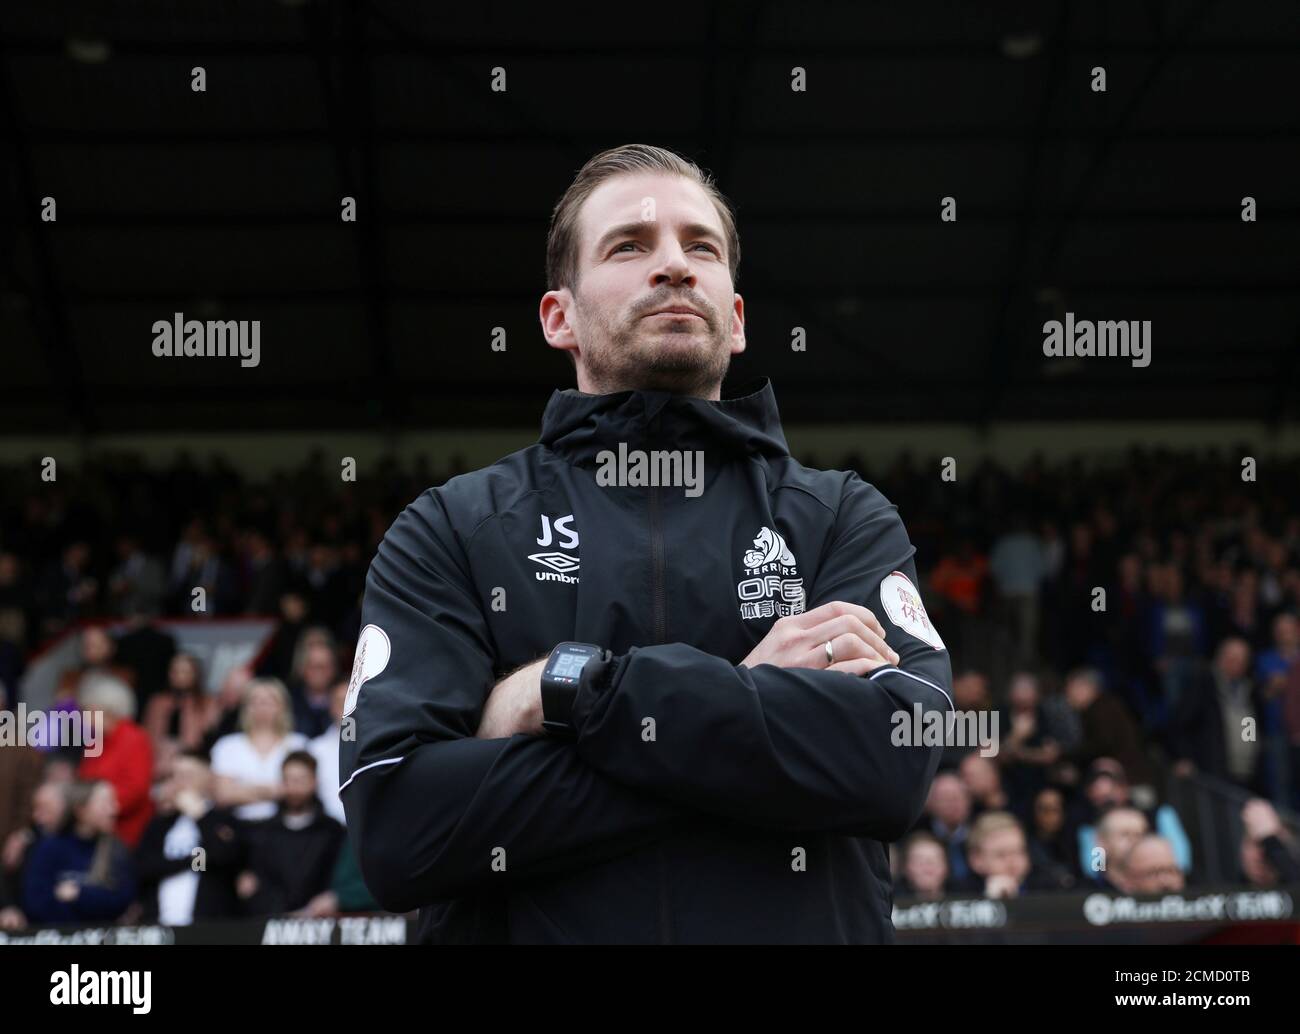 Soccer Football - Premier League - Crystal Palace v Huddersfield Town - Selhurst Park, London, Britain - March 30, 2019  Huddersfield Town manager Jan Siewert before the match    REUTERS/Hannah McKay  EDITORIAL USE ONLY. No use with unauthorized audio, video, data, fixture lists, club/league logos or "live" services. Online in-match use limited to 75 images, no video emulation. No use in betting, games or single club/league/player publications.  Please contact your account representative for further details. Stock Photo